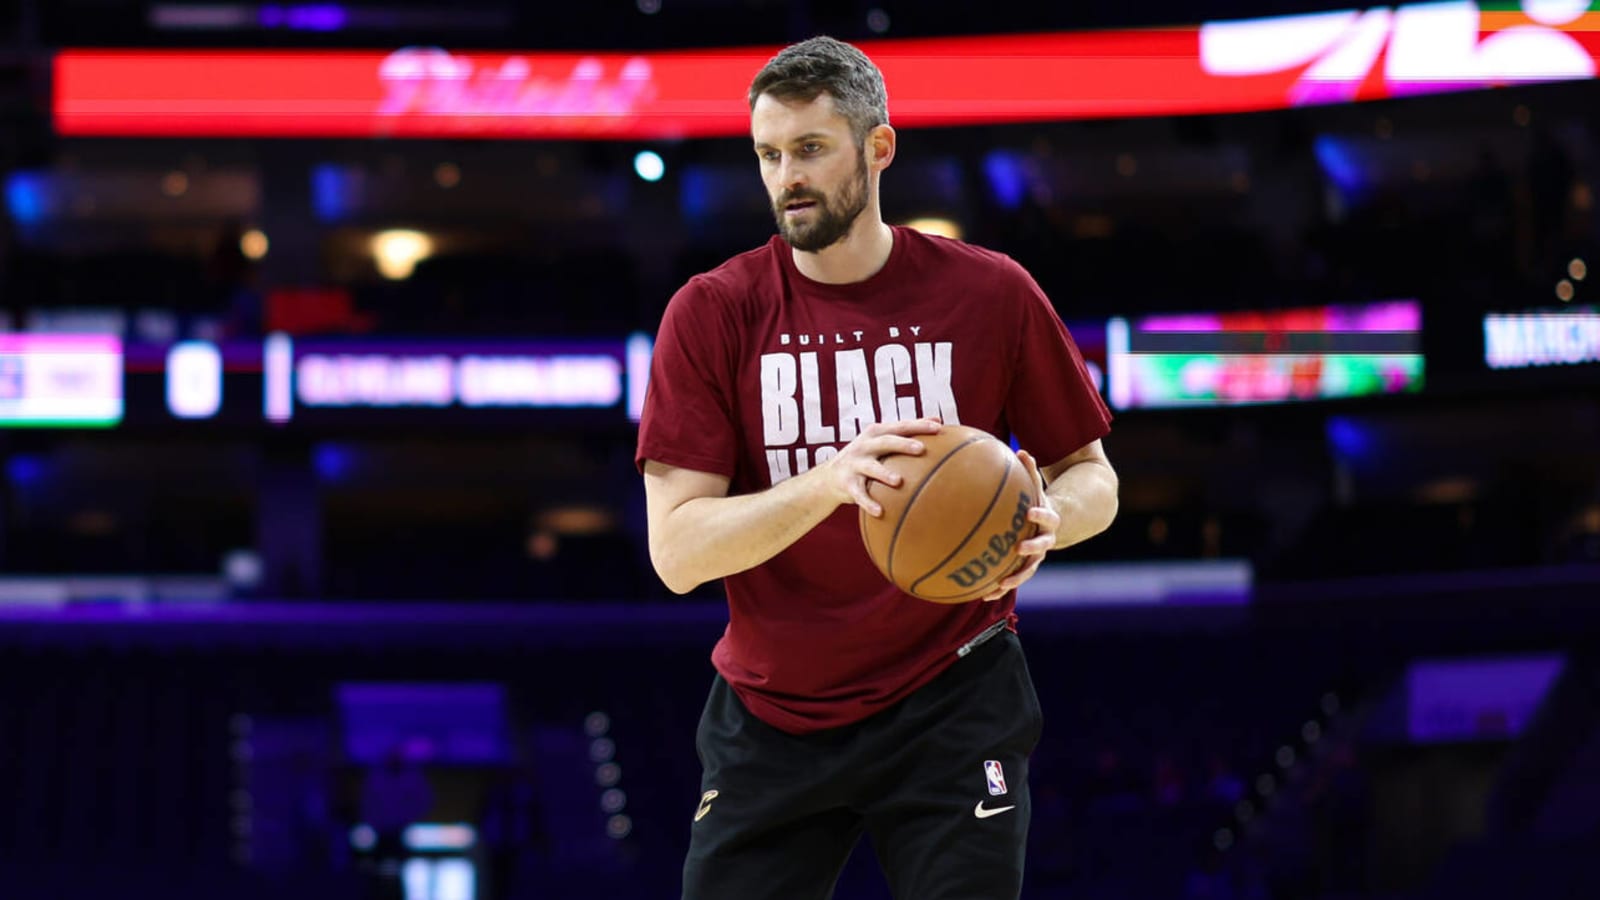 Kevin Love might be South Beach-bound after buyout with Cavs